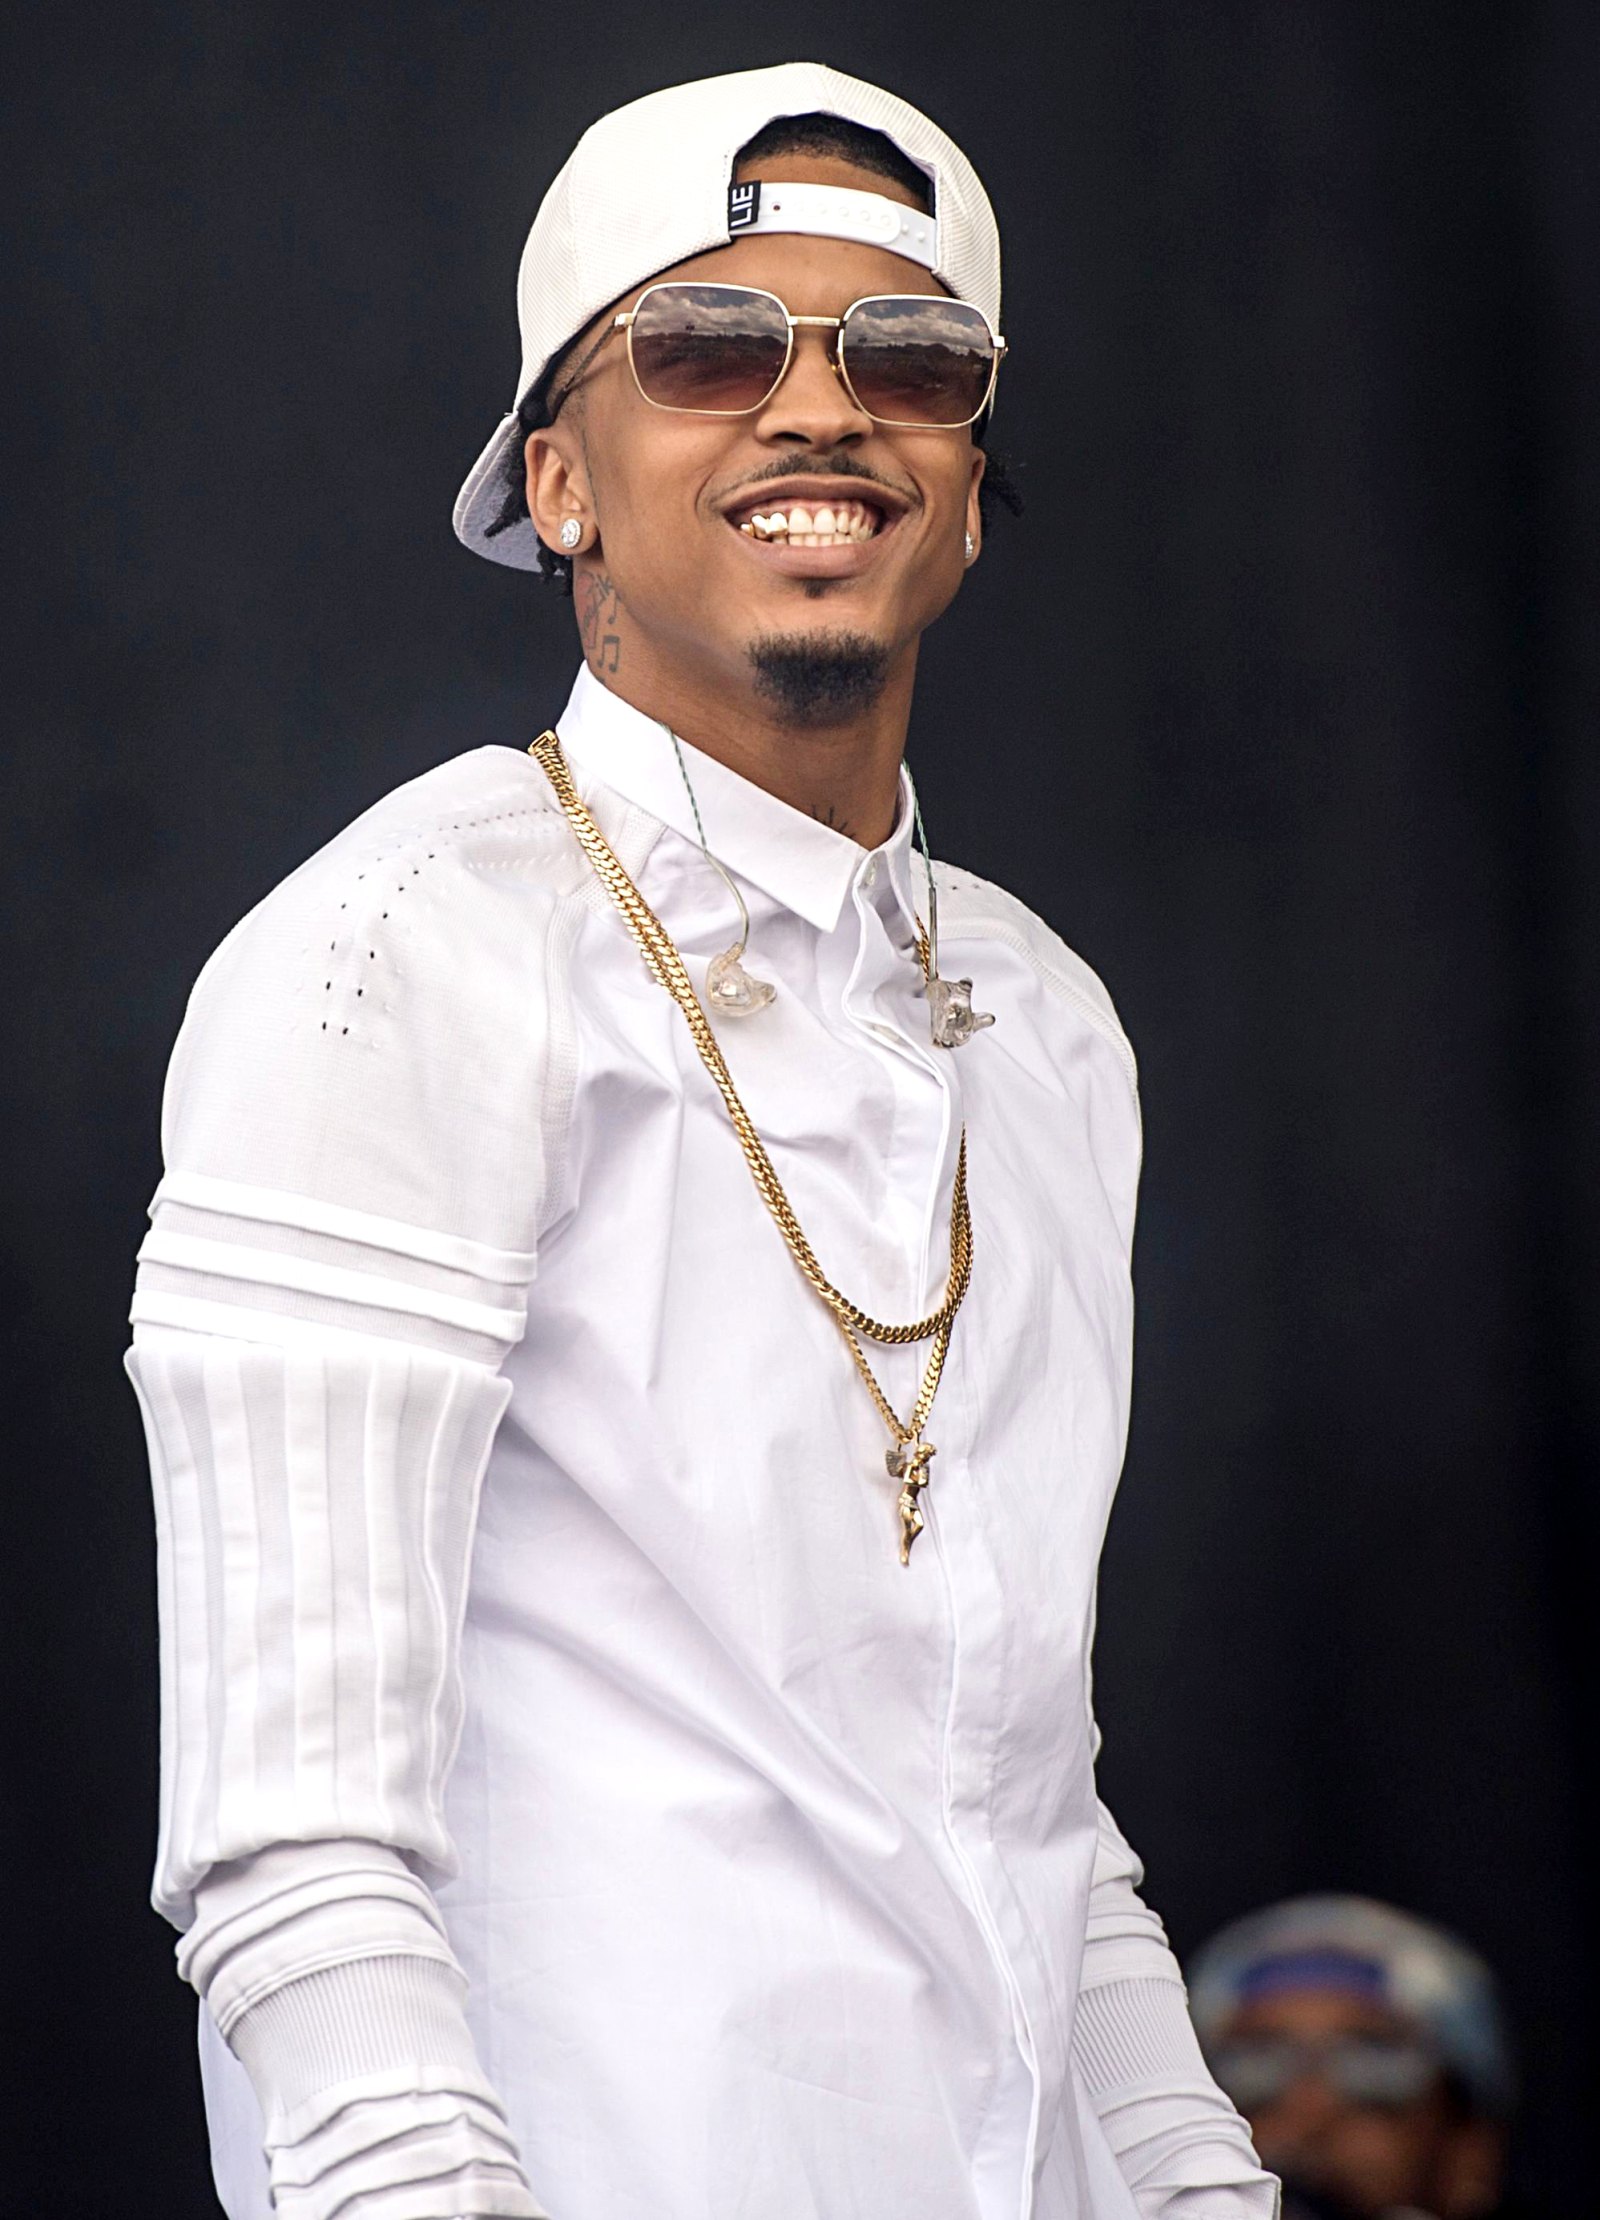 August Alsina 5 Things Know About the Musician